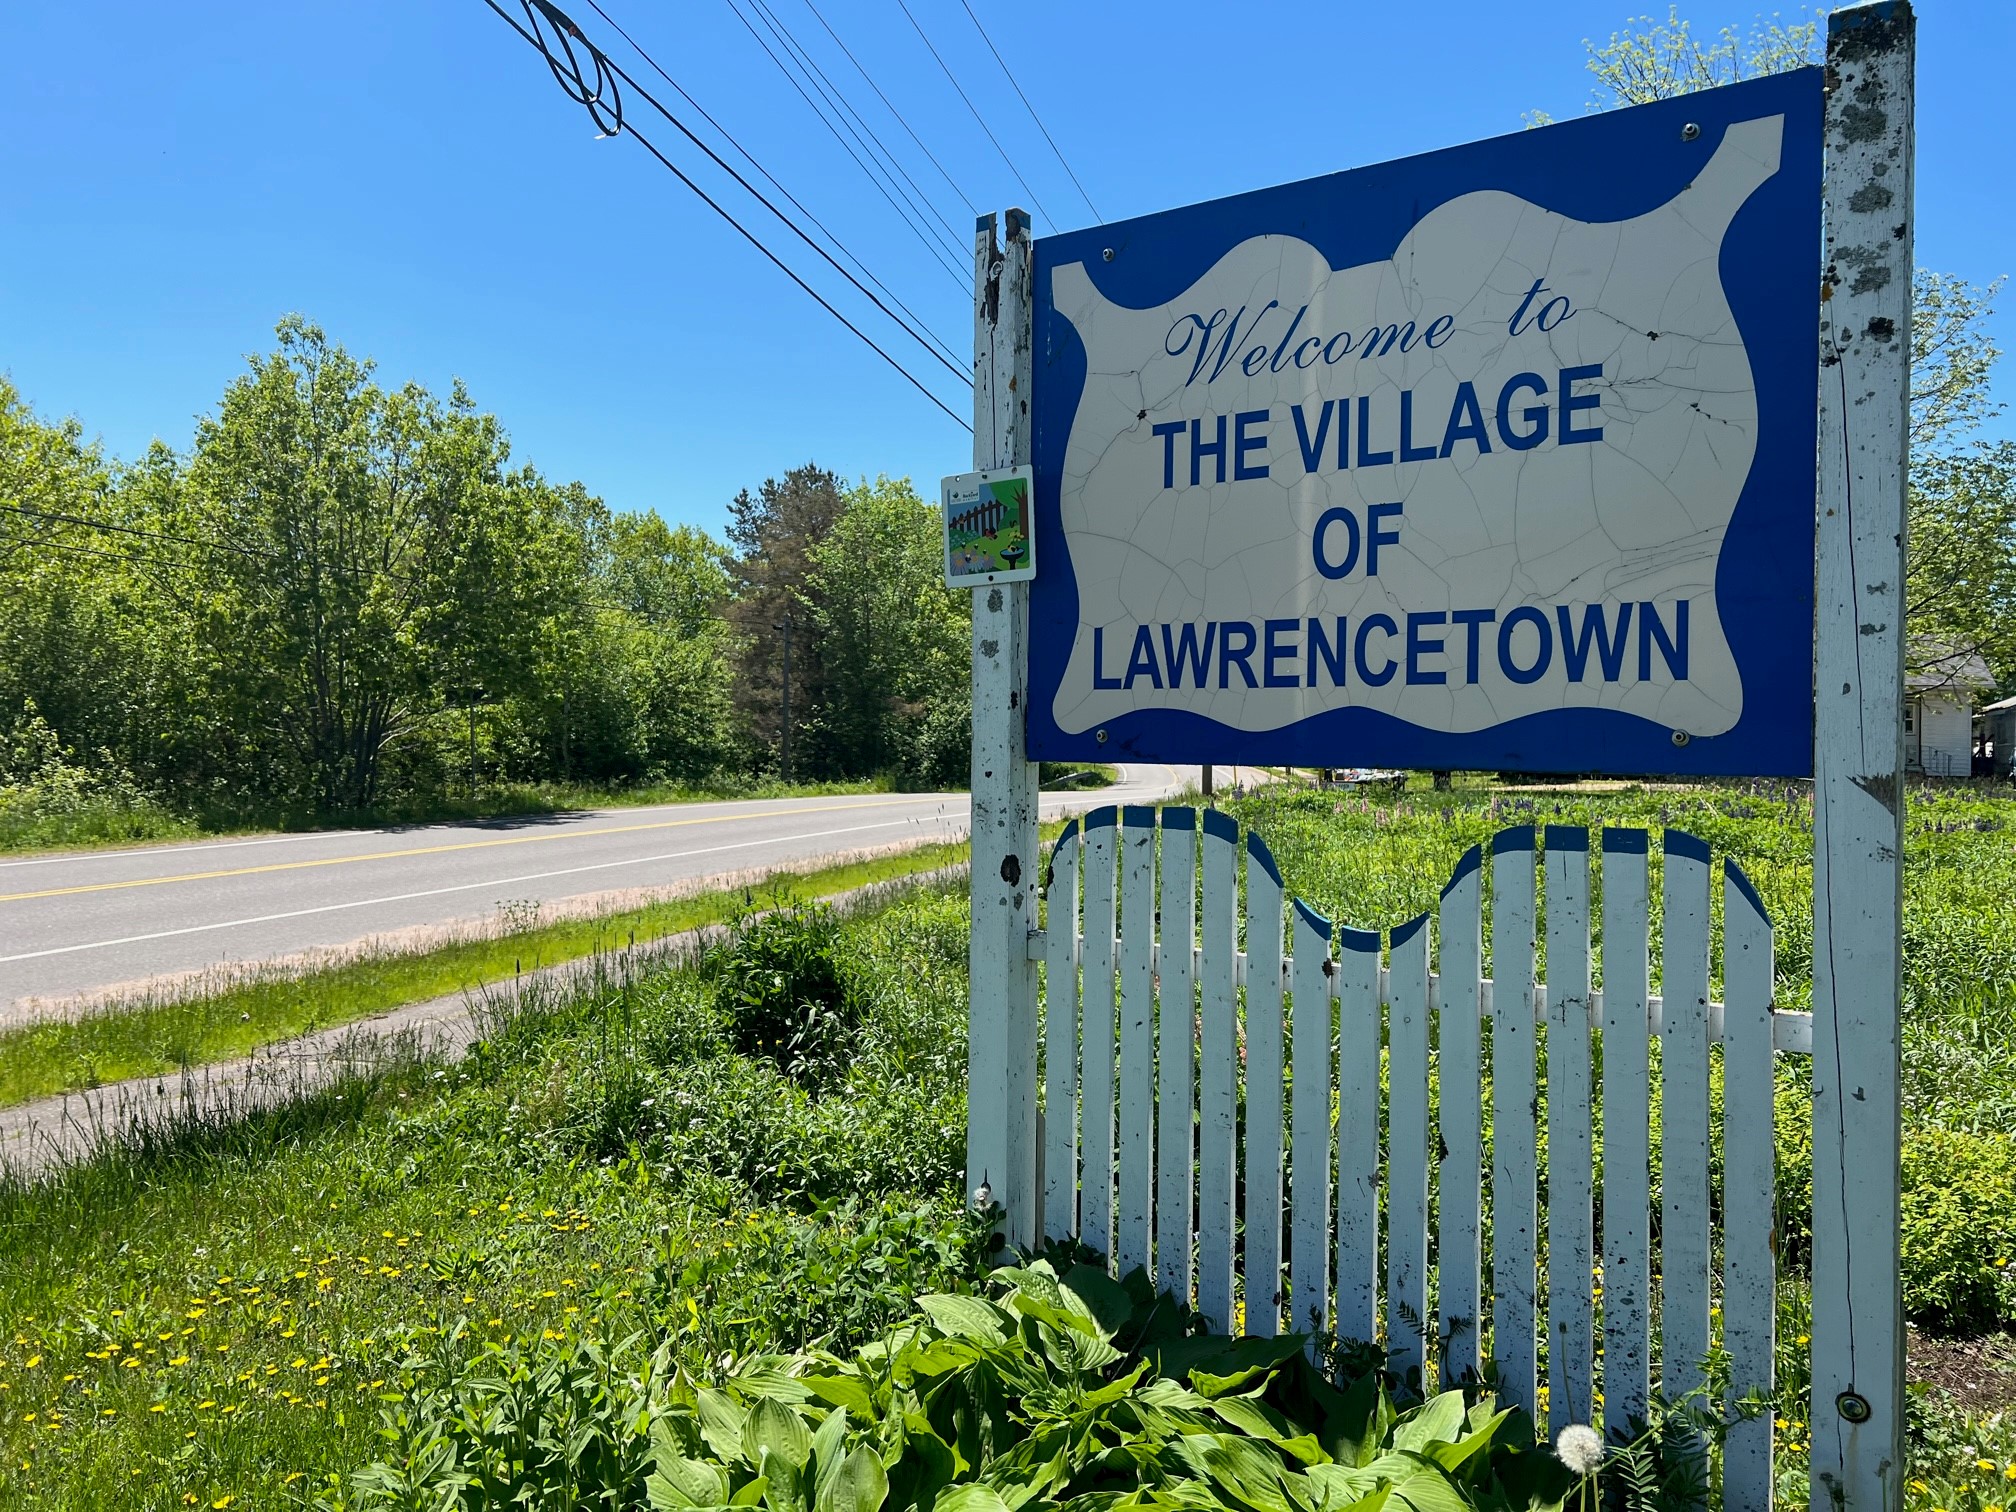 What’s it like living in Lawrencetown?